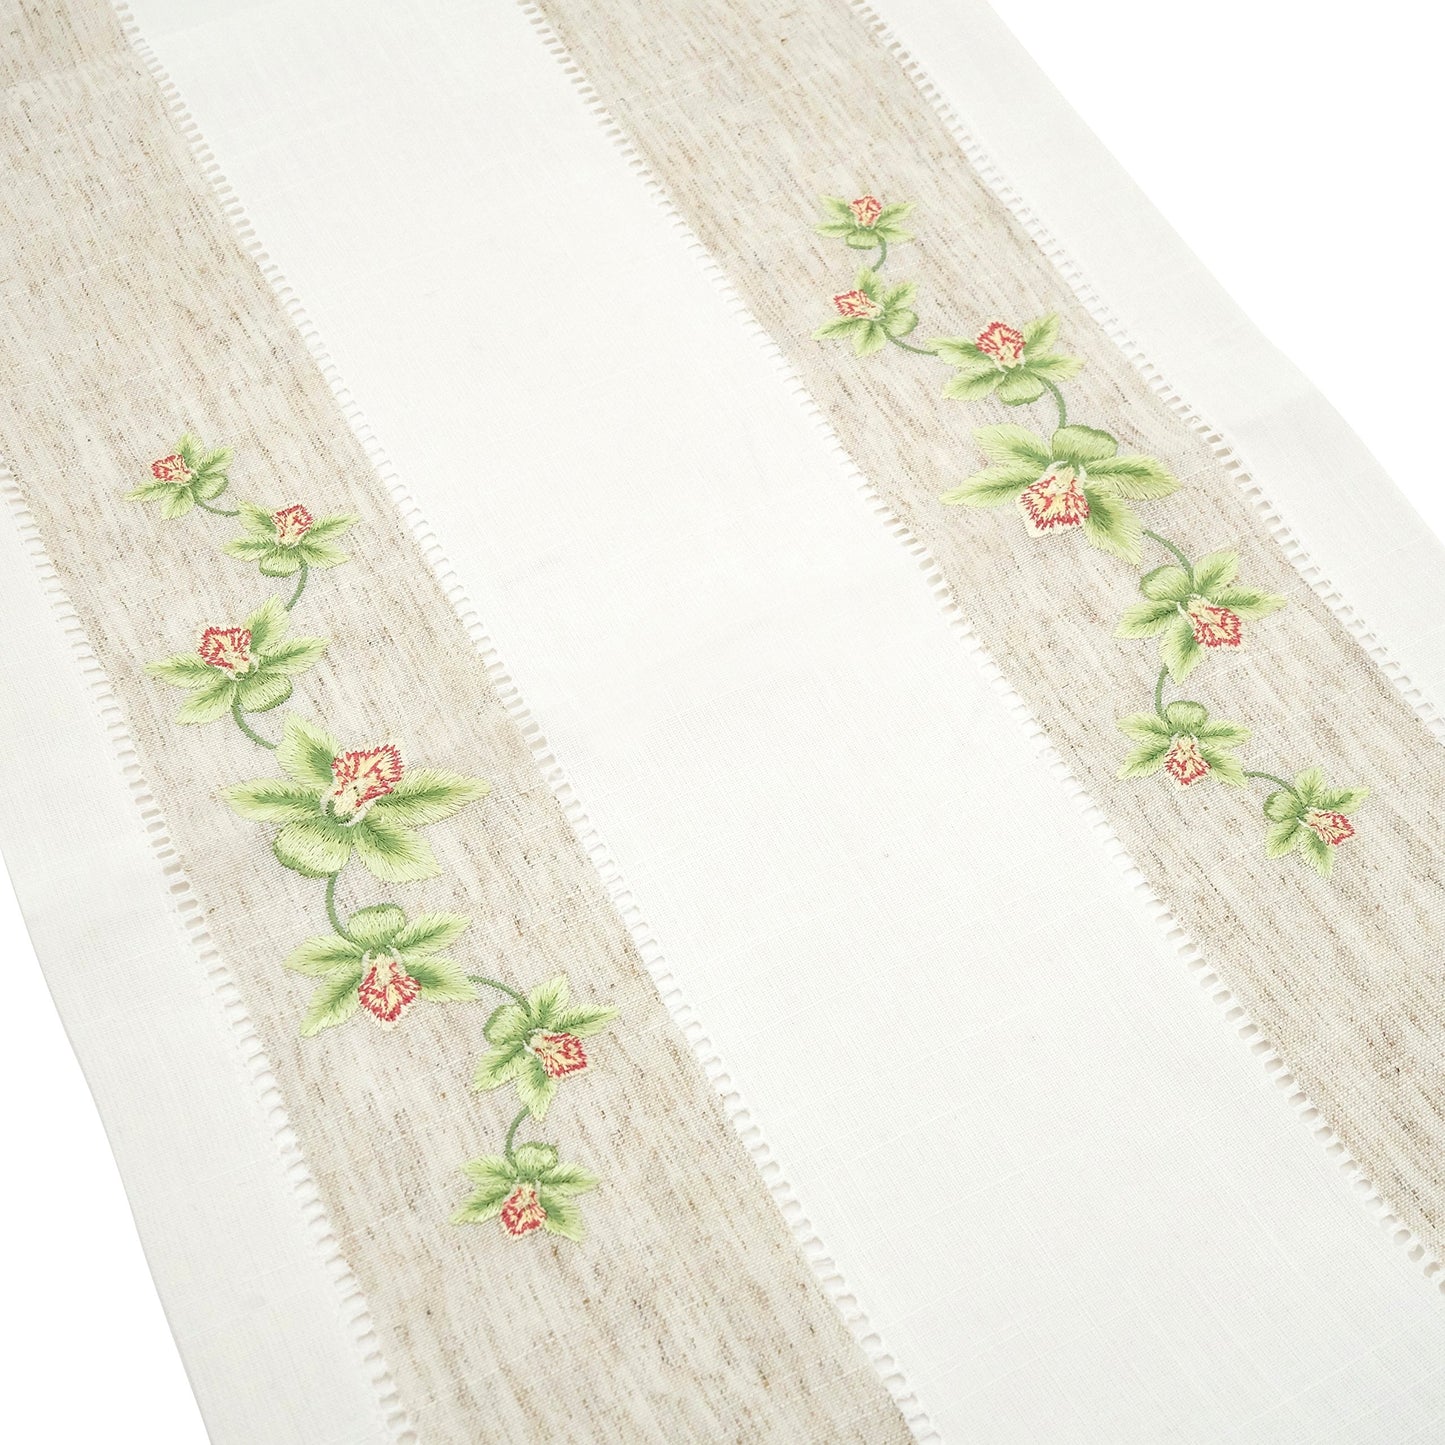 Fennco Styles Hommage Brodé Collection Cottage Lemon Embroidery Border Hemstitch Table Runner 15 x 70 Inch – Ivory Table Cover for Wedding, Banquet, Tea Party and Home Décor